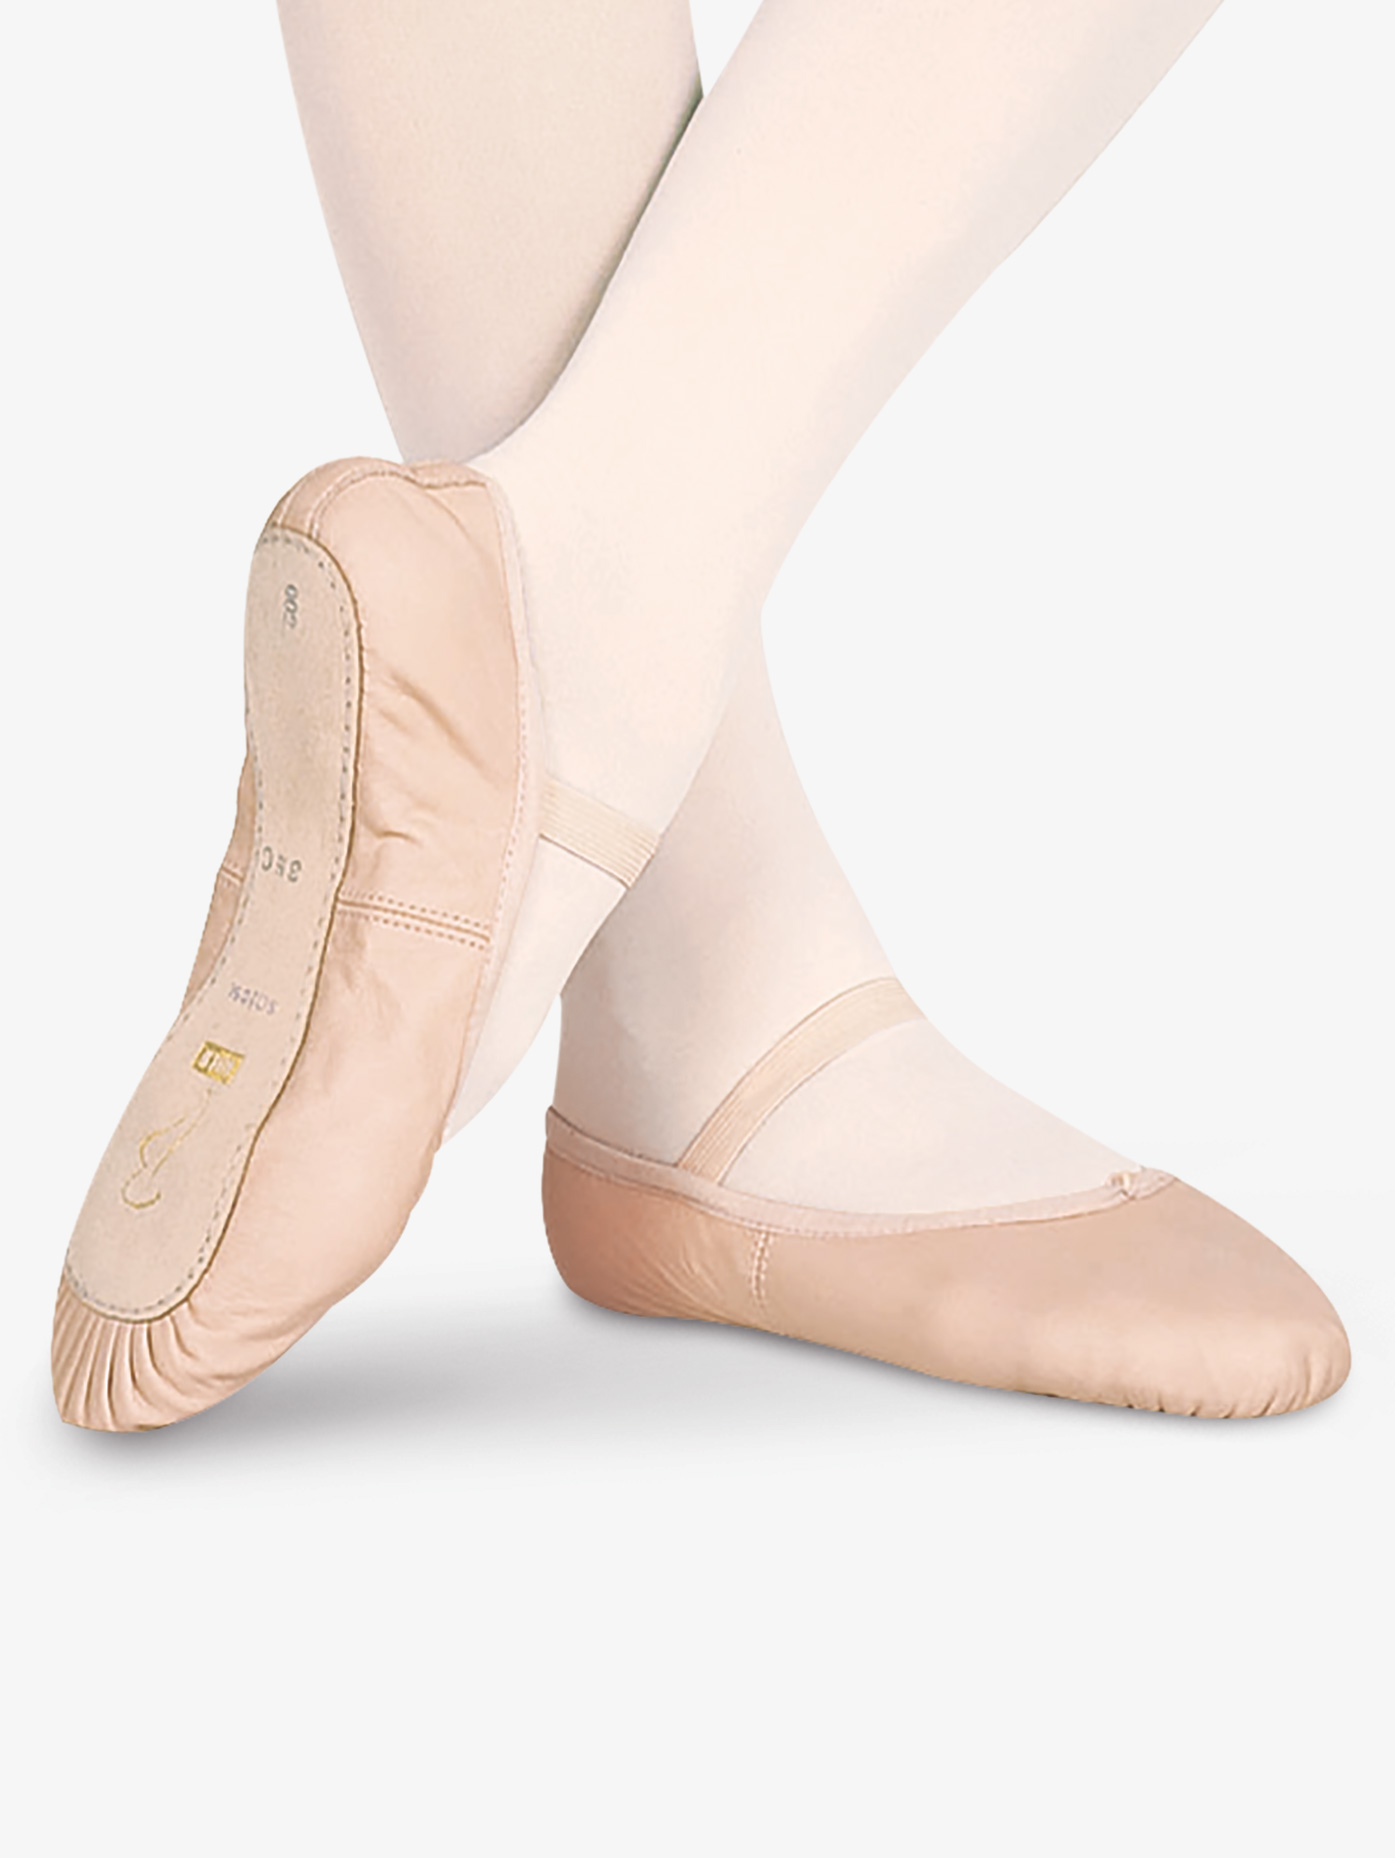 leather ballet shoes